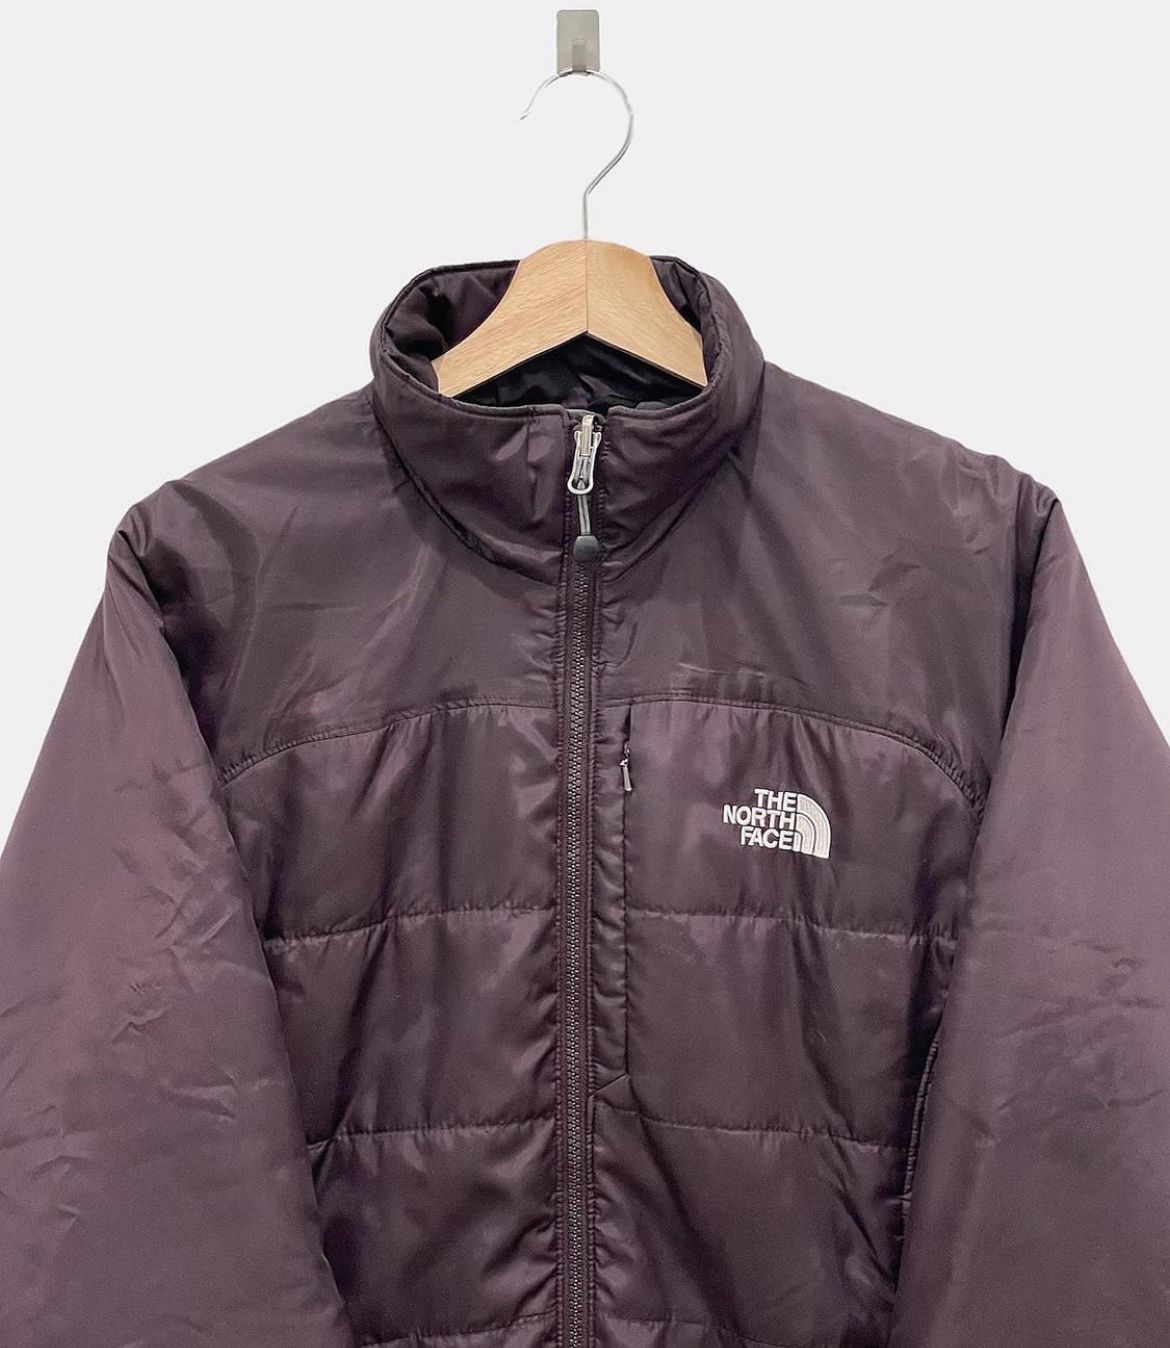 Vintage The North Face Jacket